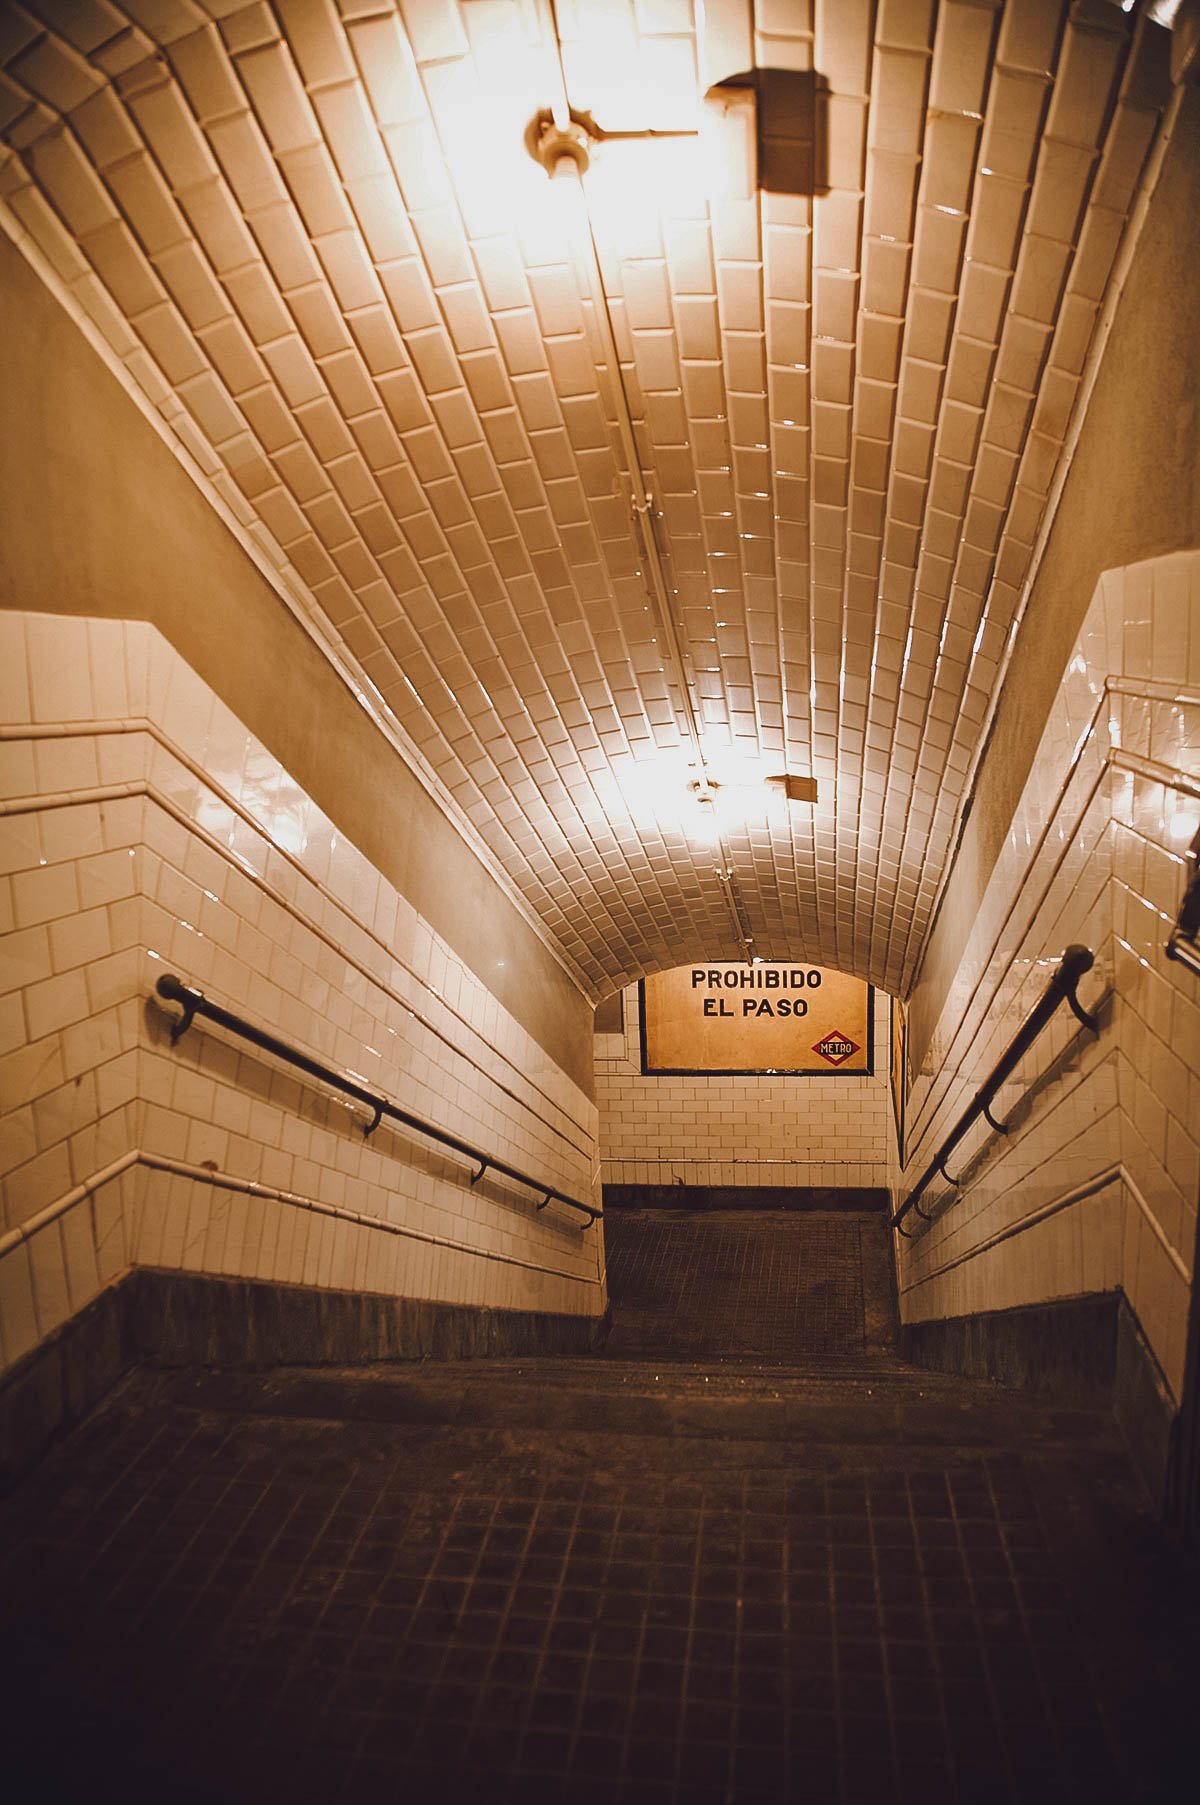 Madrid Travel Guide in Photos: Inside Chamberí Ghost Station